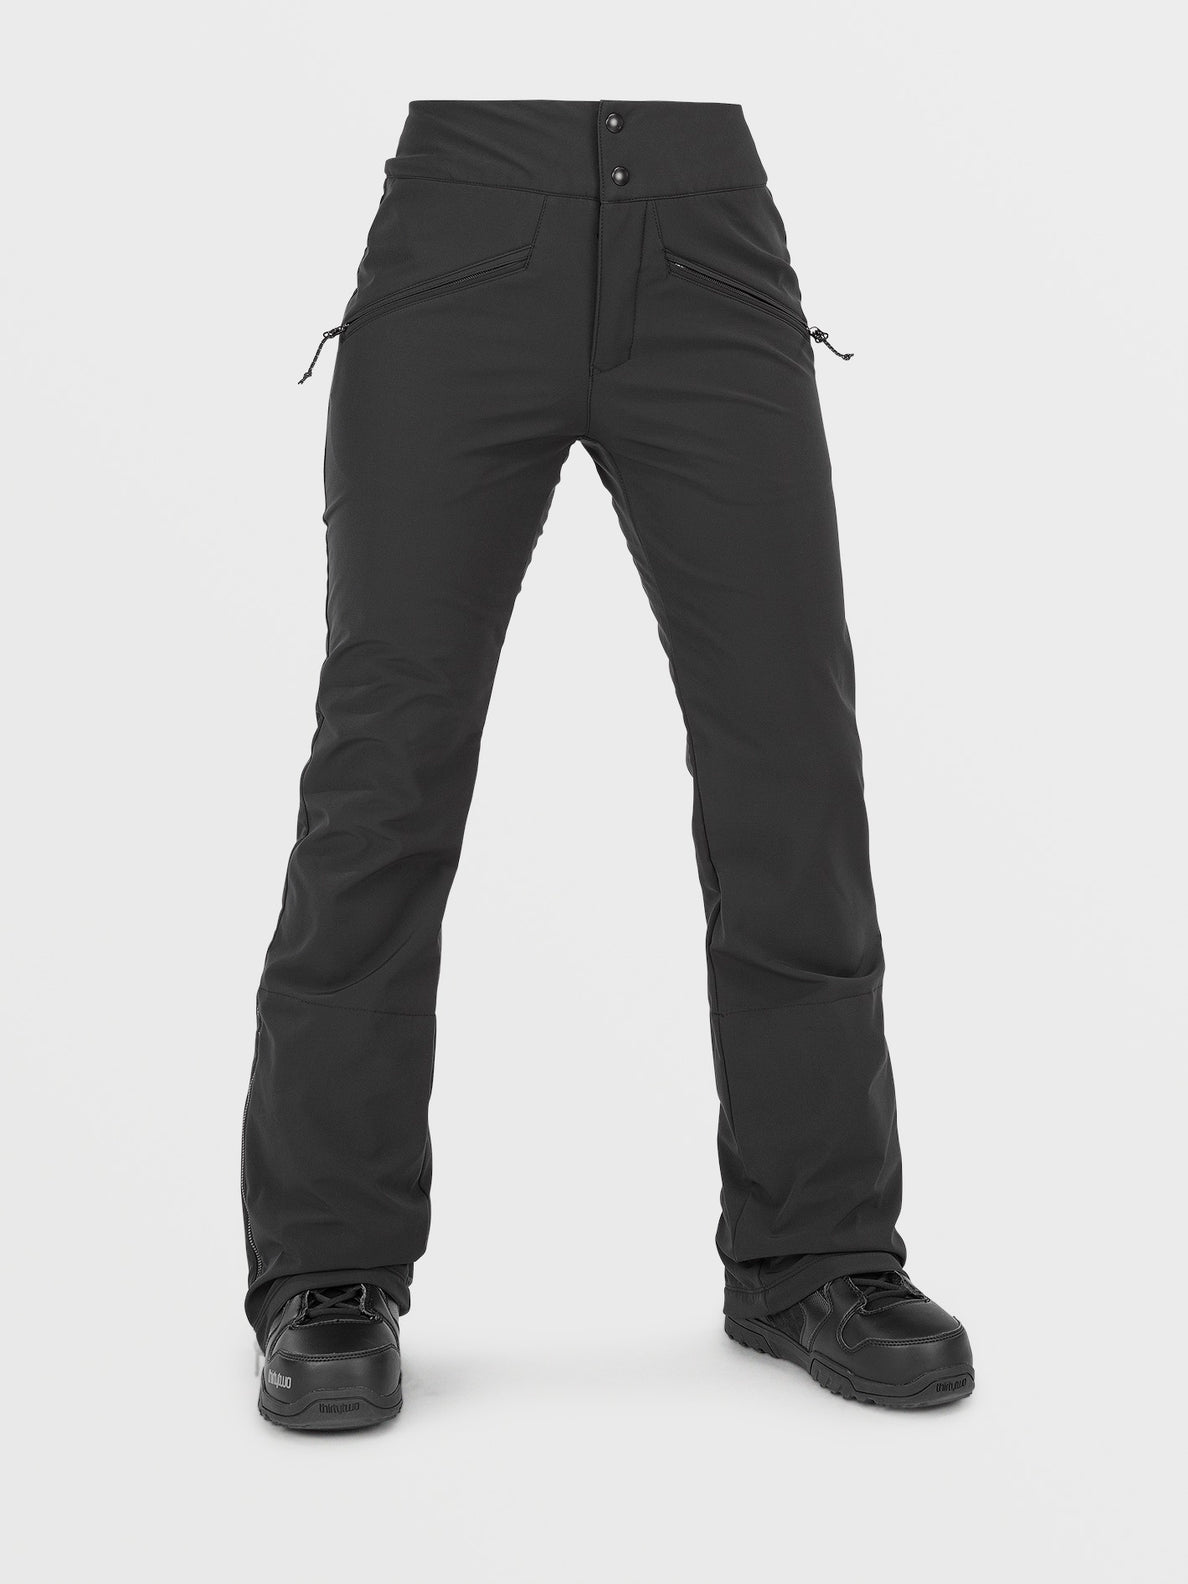 Smith's Workwear Stretch Fit High-Rise Fleece-Lined 5-Pocket Jeans